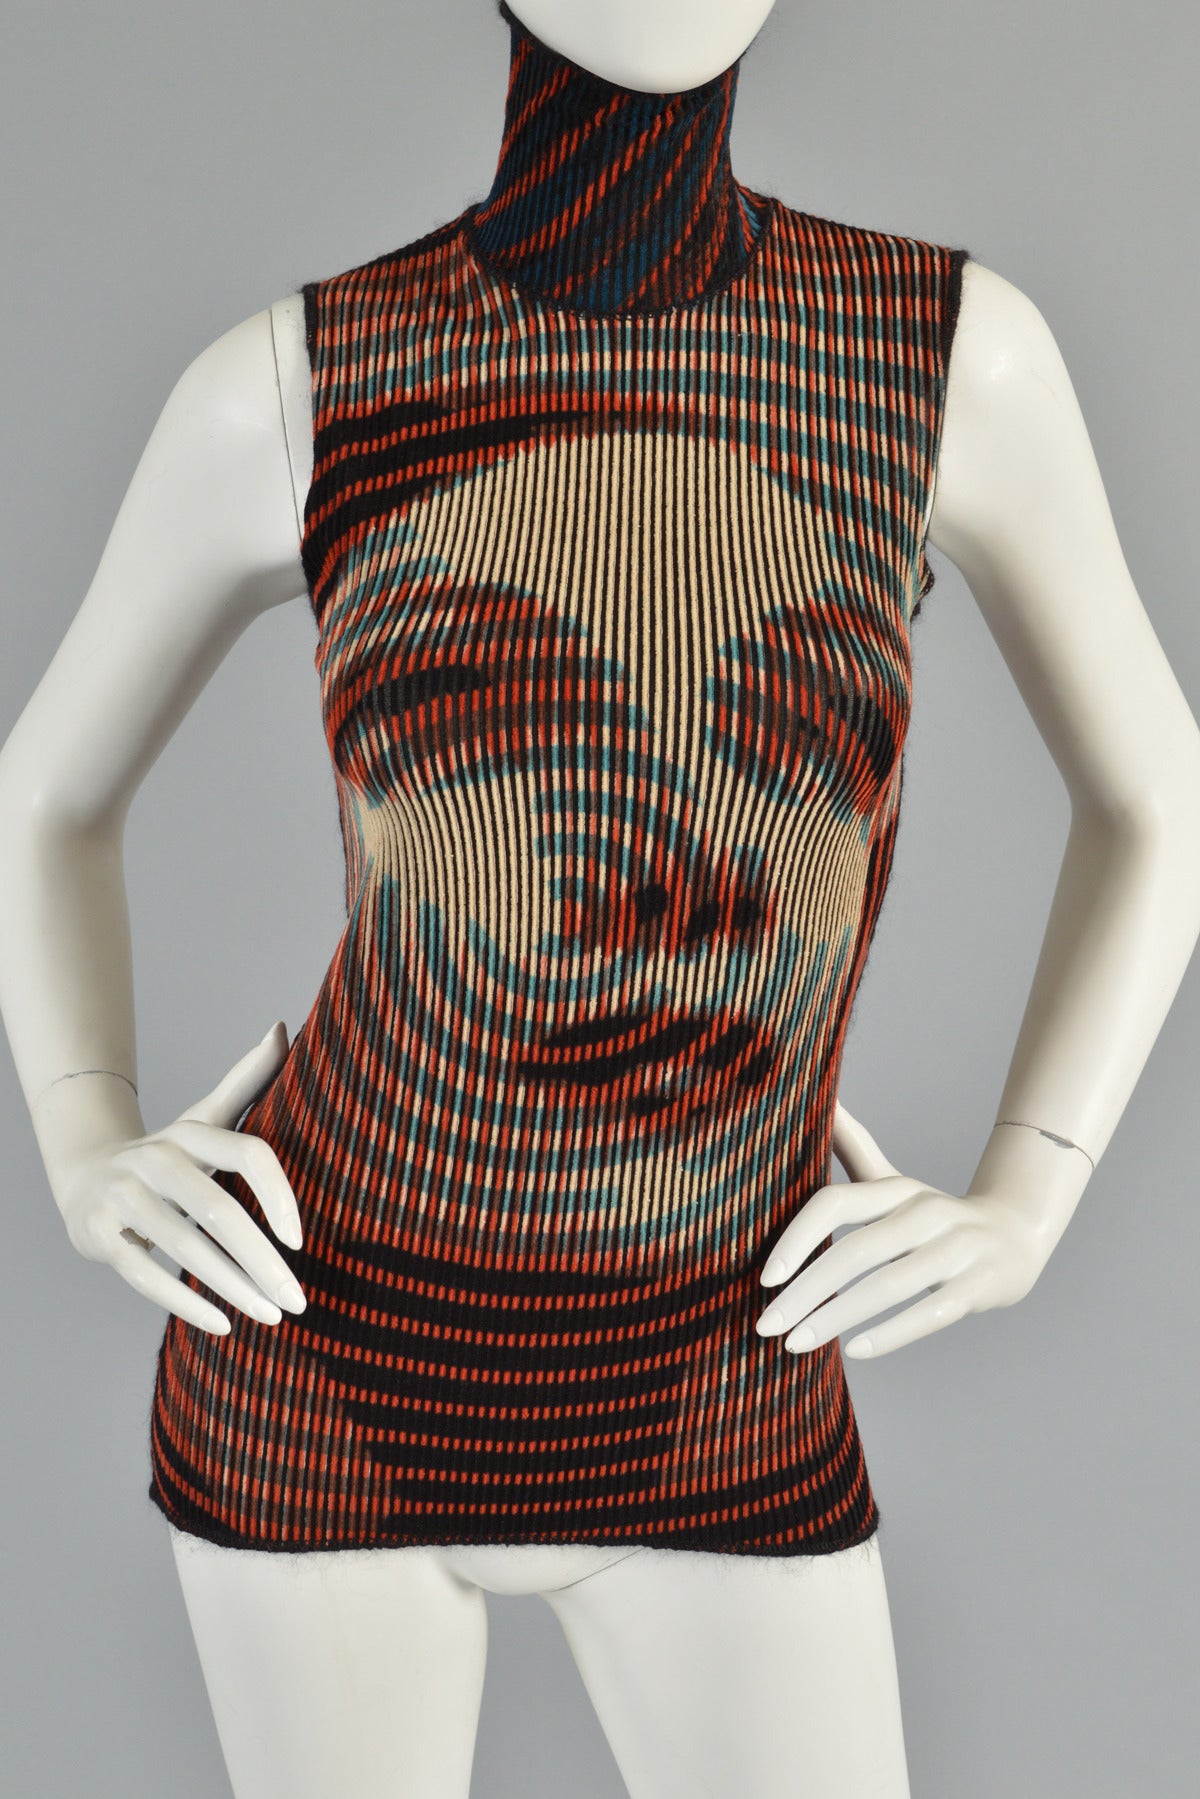 Jean Paul Gaultier Spiral Woman Sleeveless Top In Excellent Condition In Yucca Valley, CA